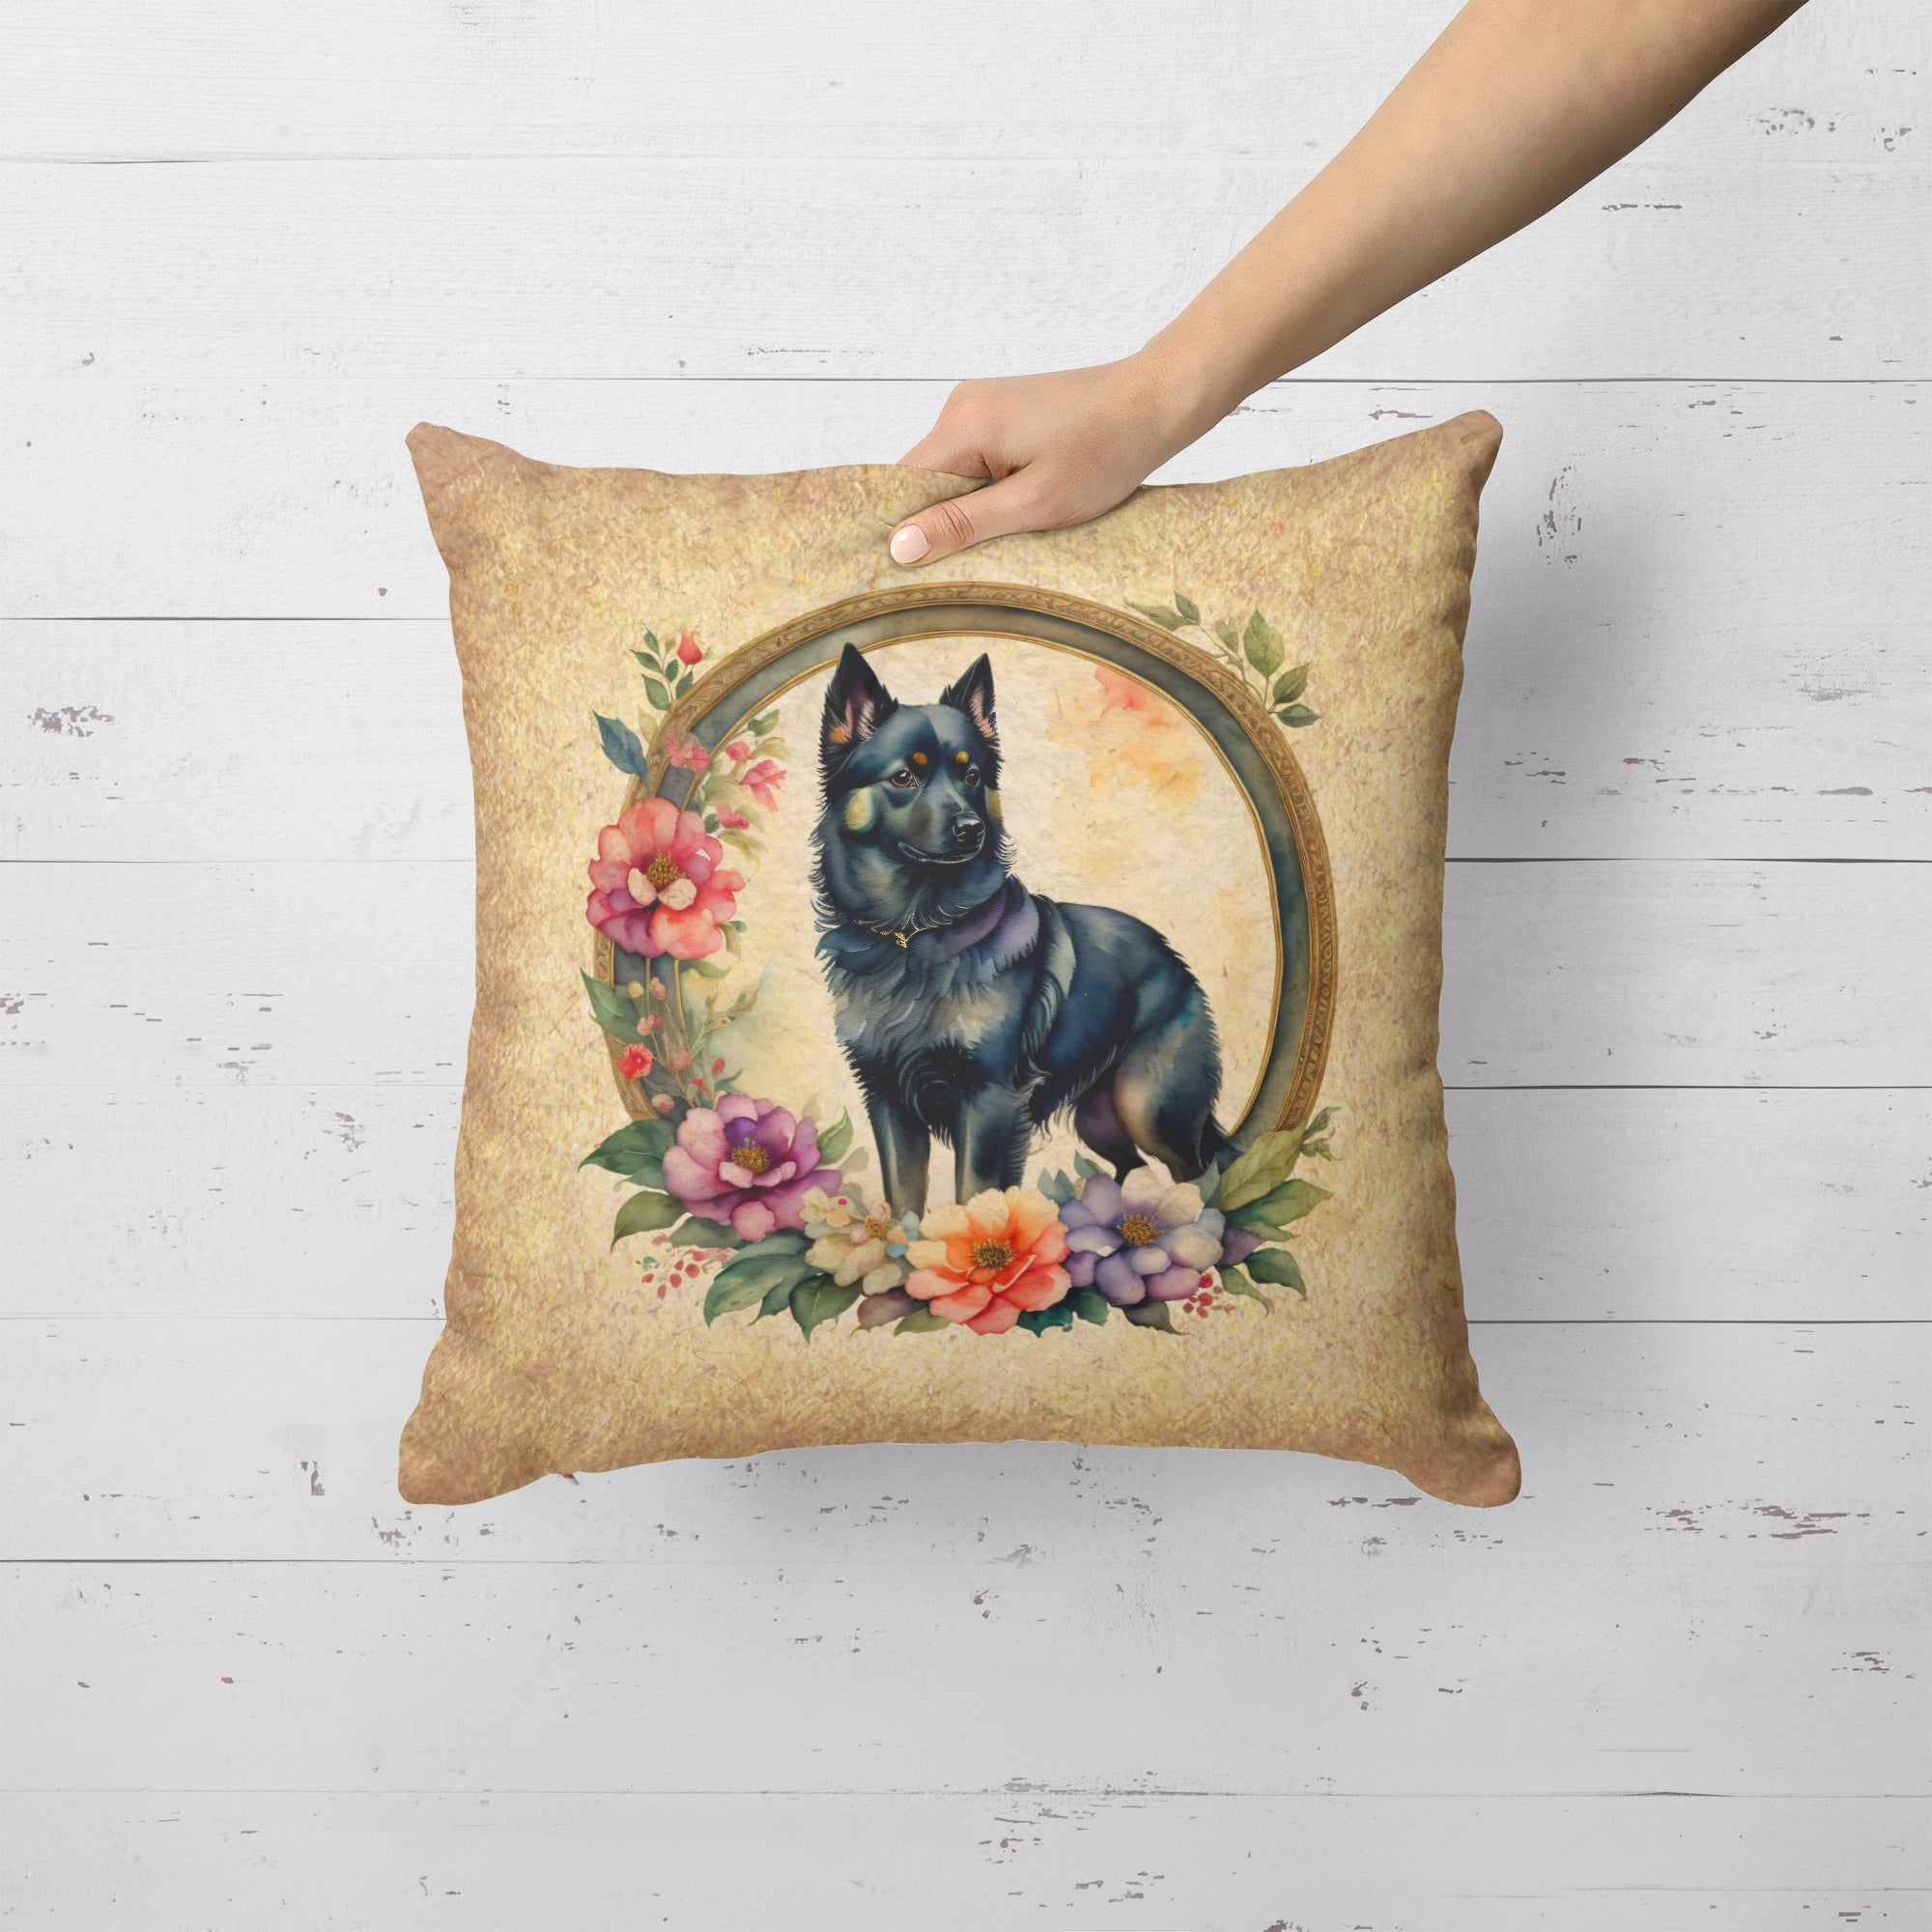 Buy this Schipperke and Flowers Fabric Decorative Pillow